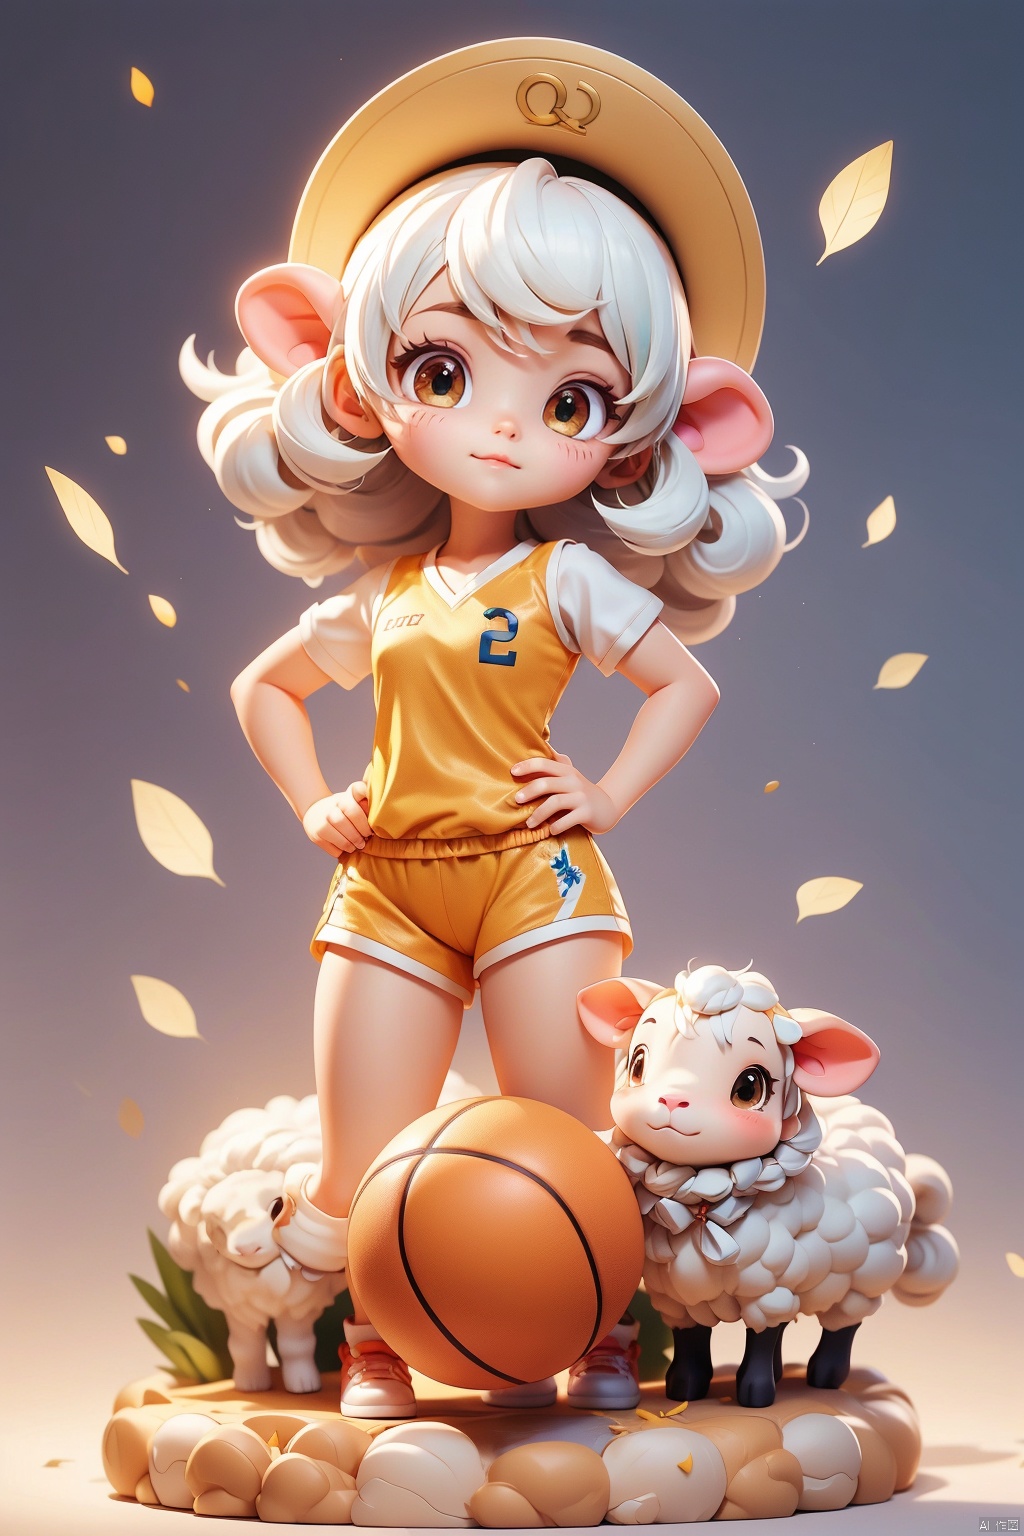 1 girl, (3 years :1.9), solo, (Q version :1.6), IP, determined expression, sheep horns, animal features, basketball uniform, blush, white hair, (sheep curls :0.8), simple white background, hands on hips